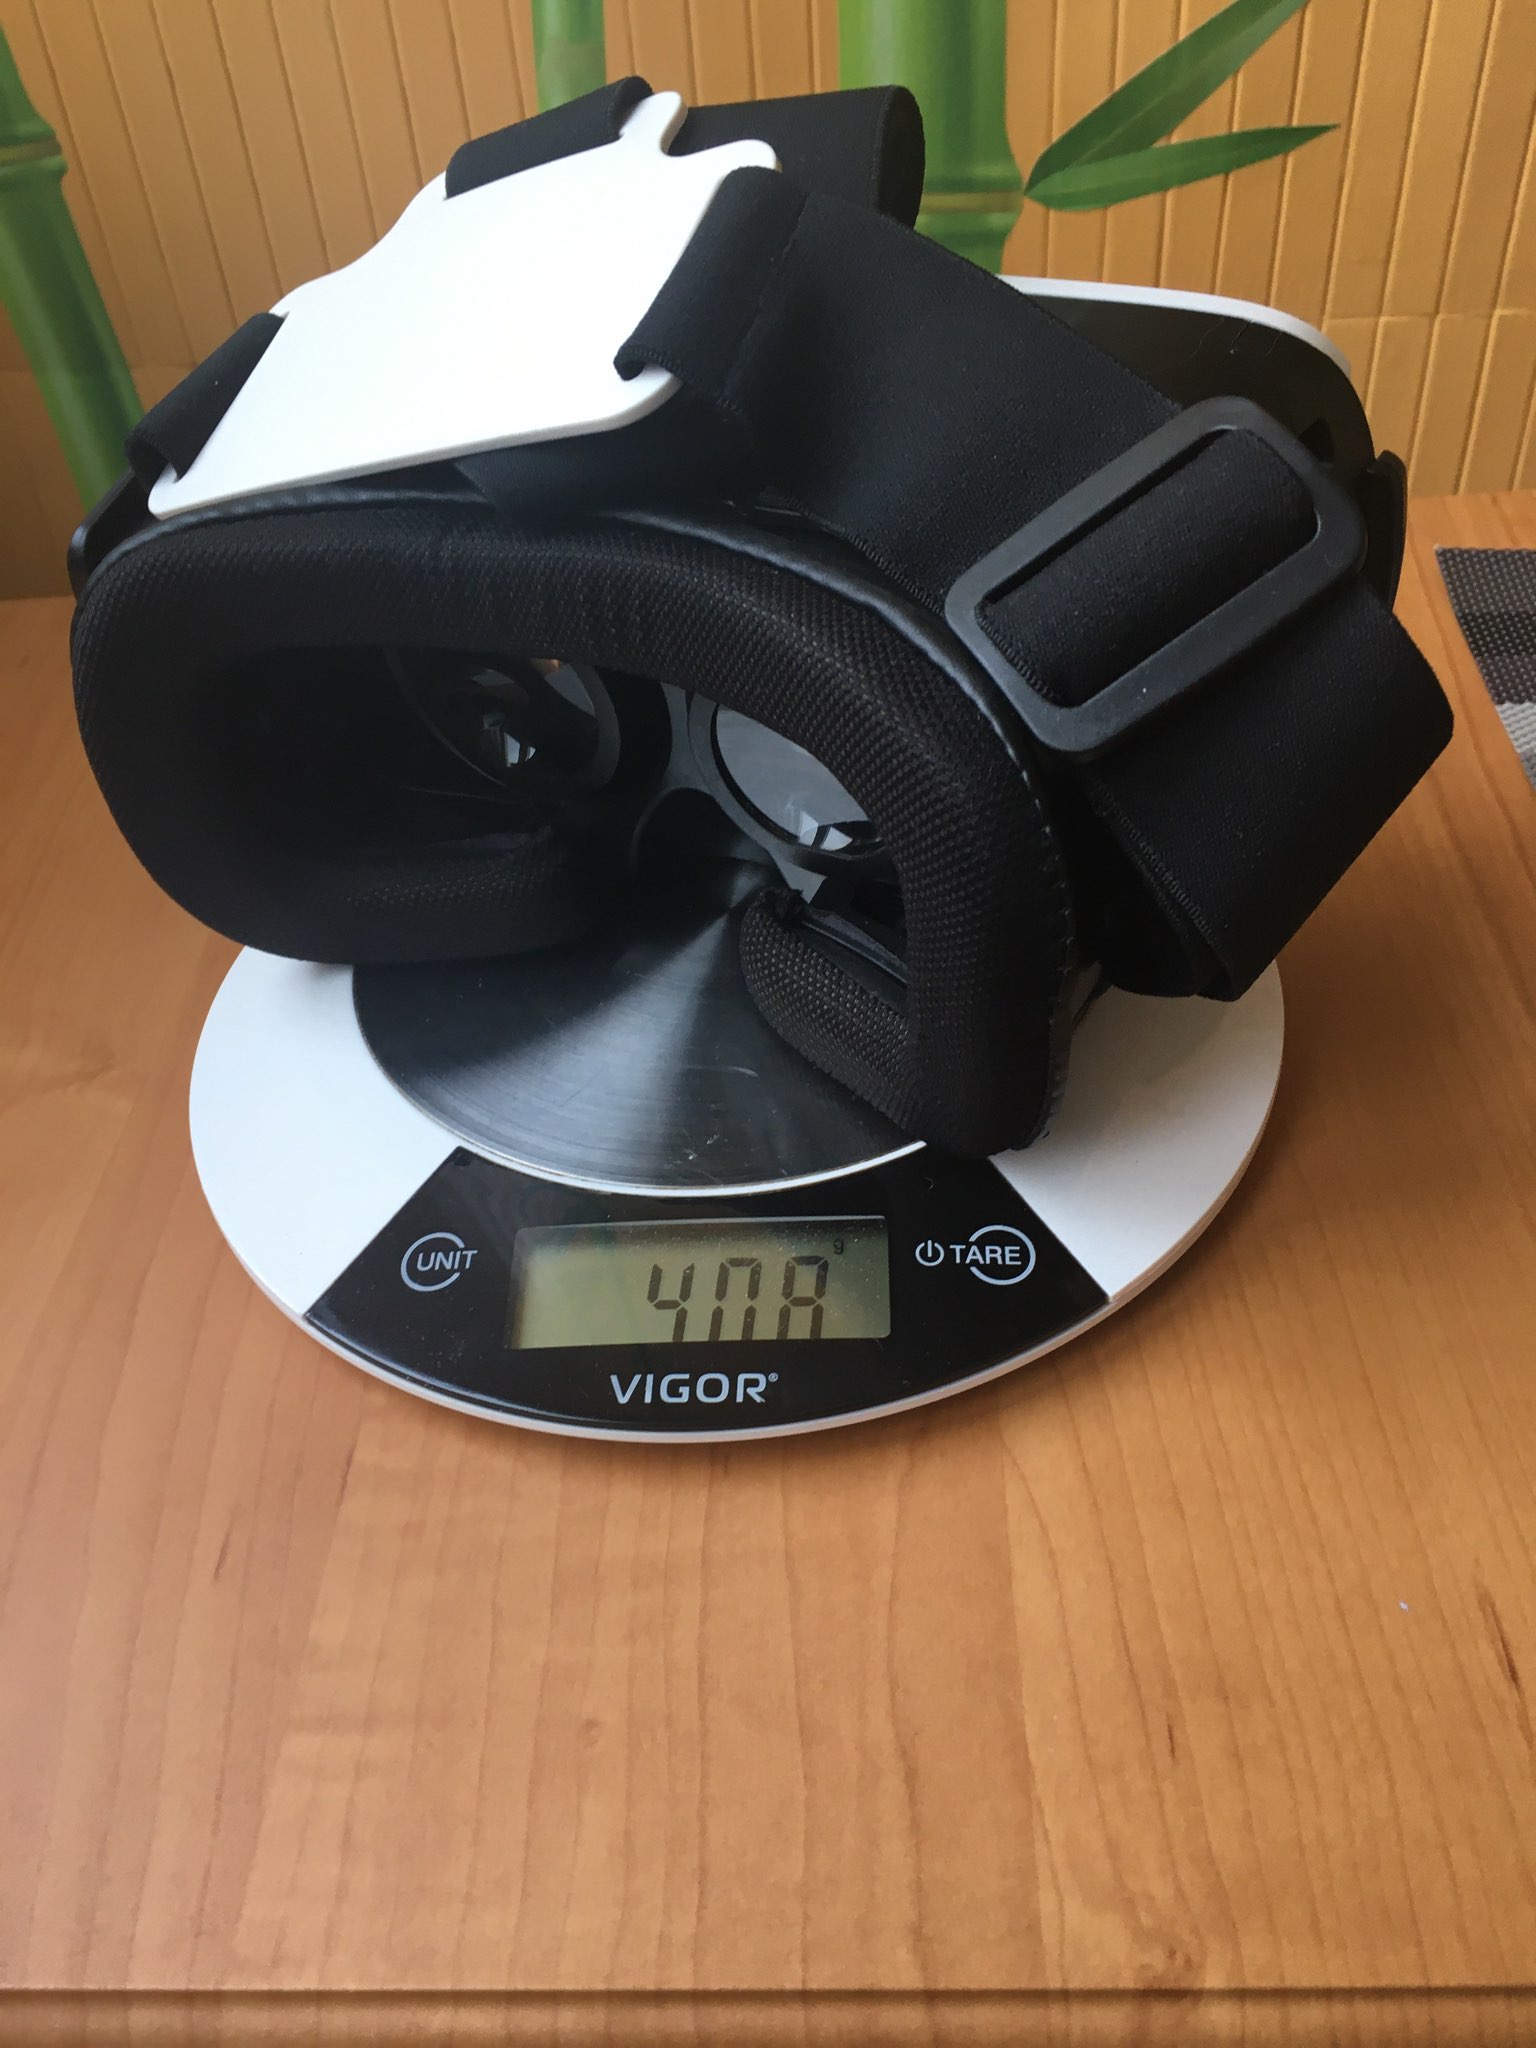 the weight of virtual reality glasses